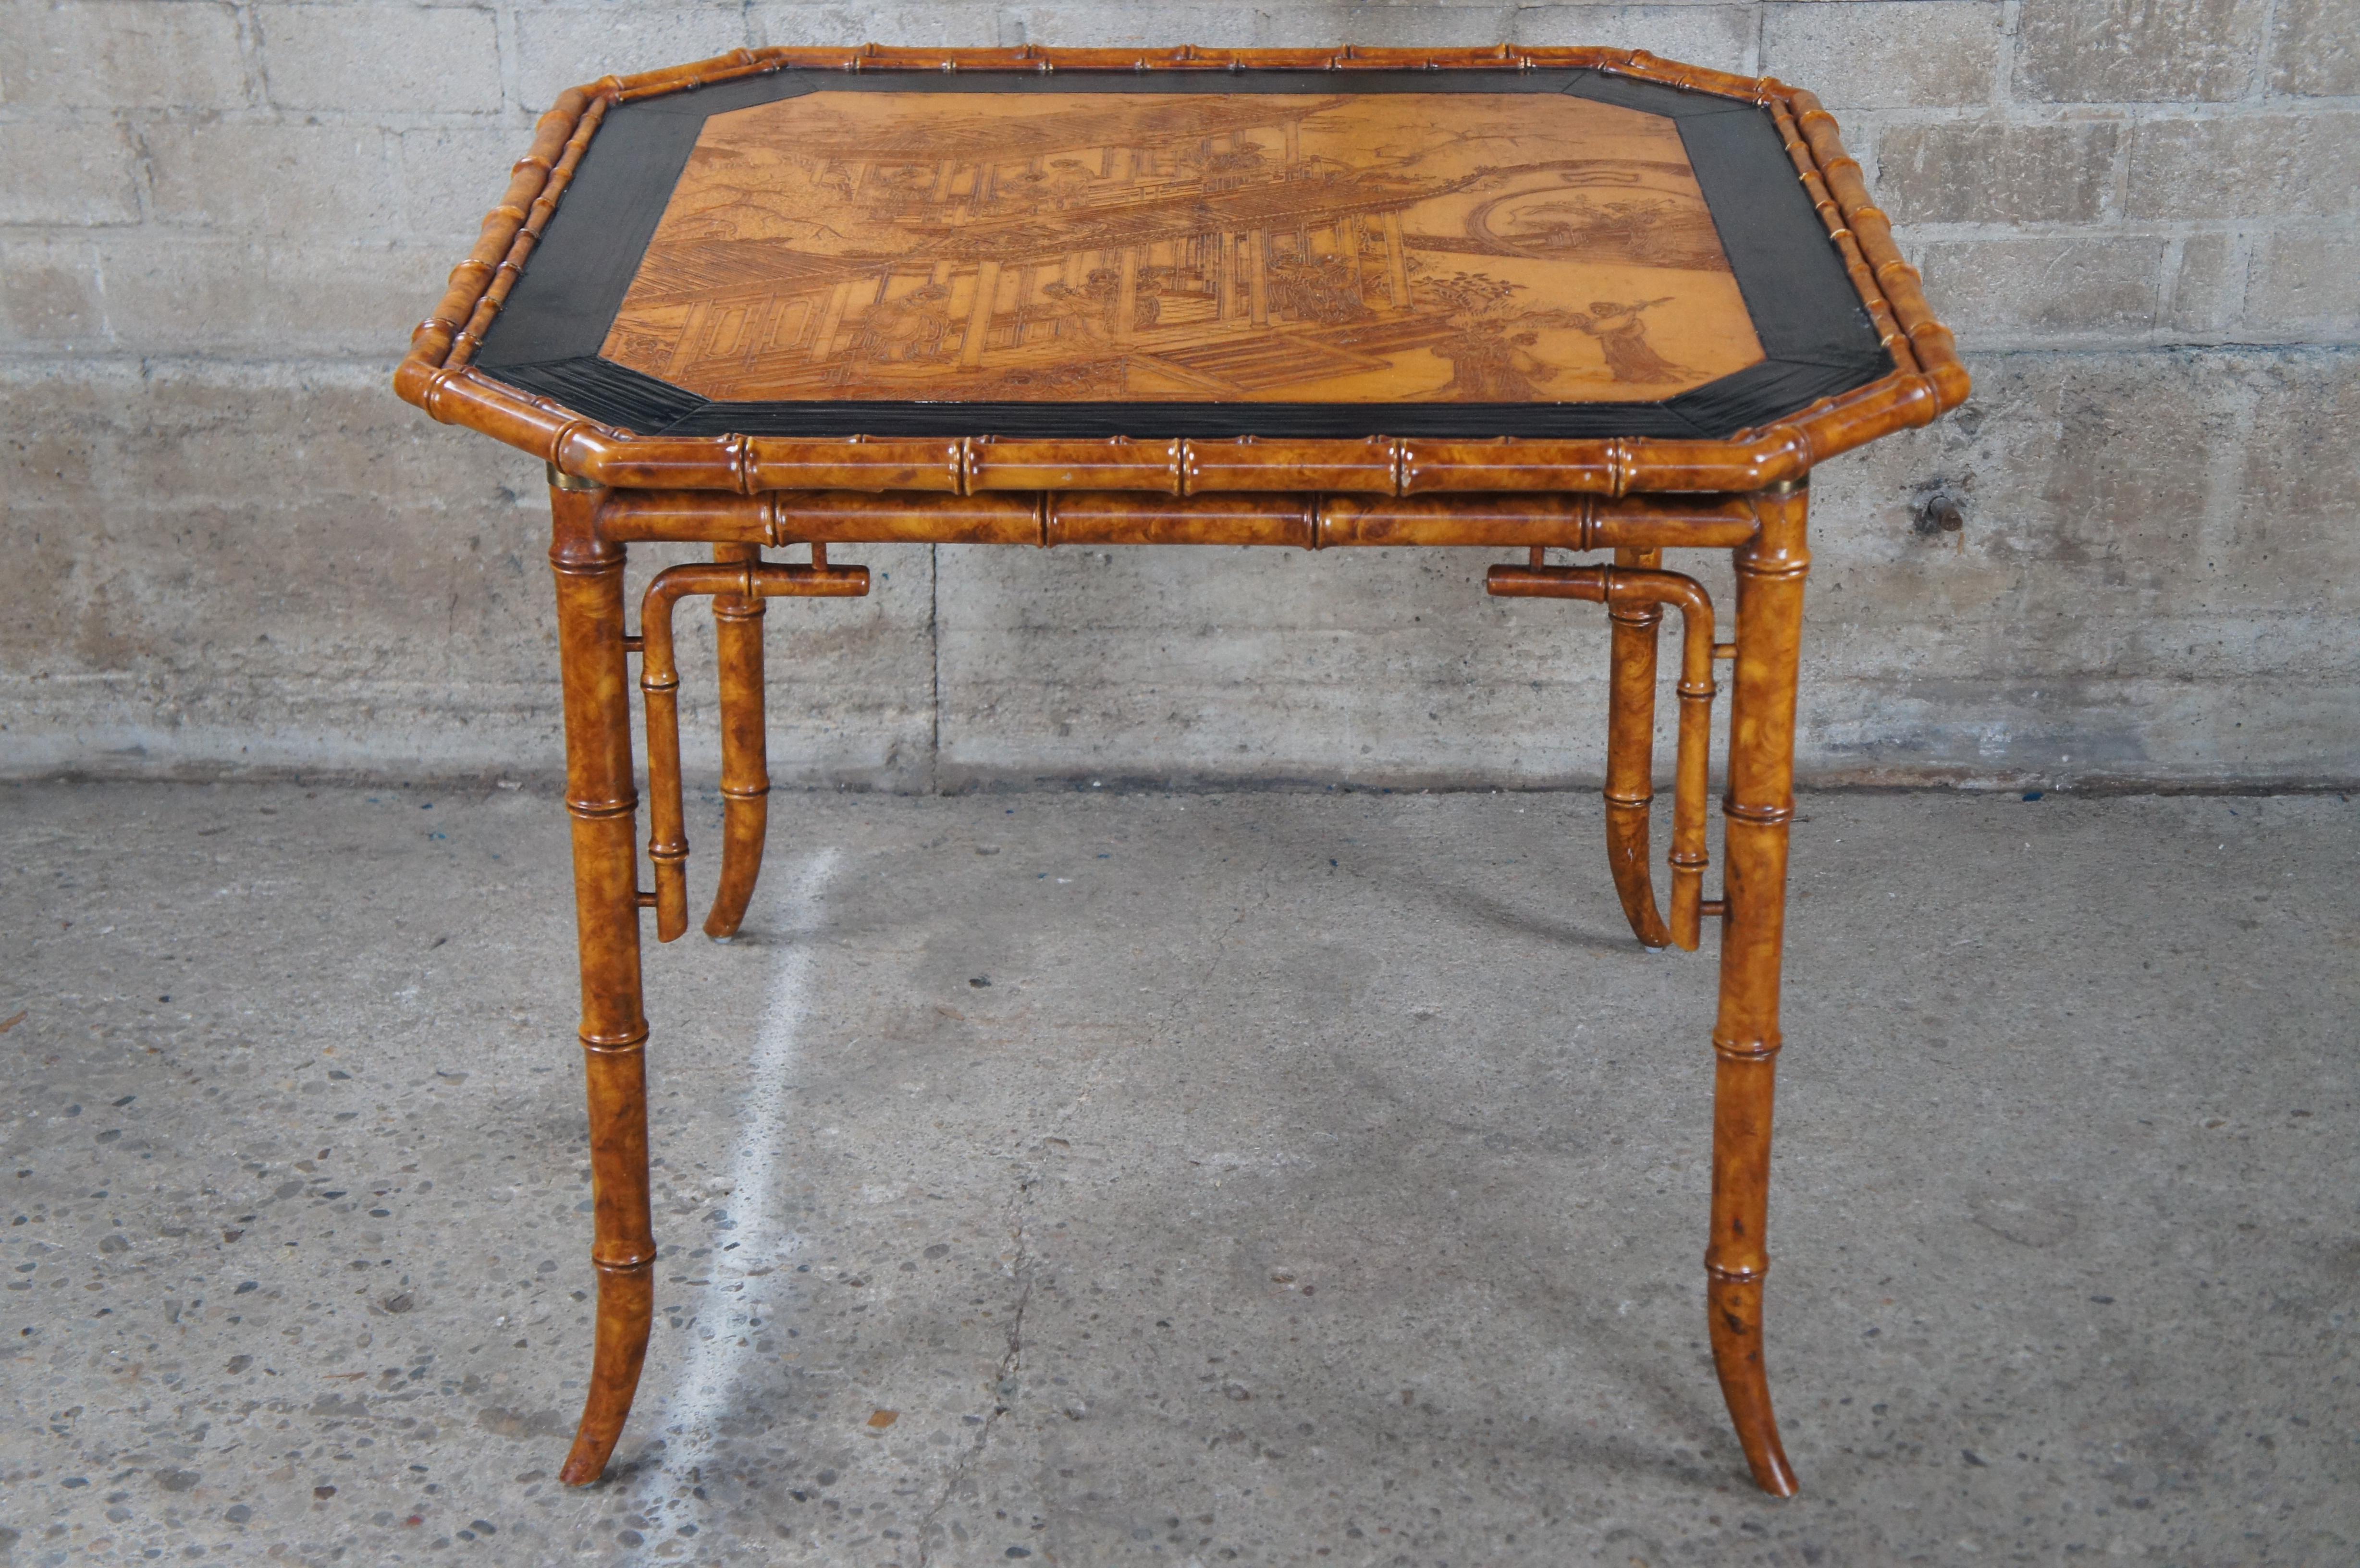 20th Century Chinoiserie Faux Bamboo Black Lacquer Crane Geisha Game Table & Chairs For Sale